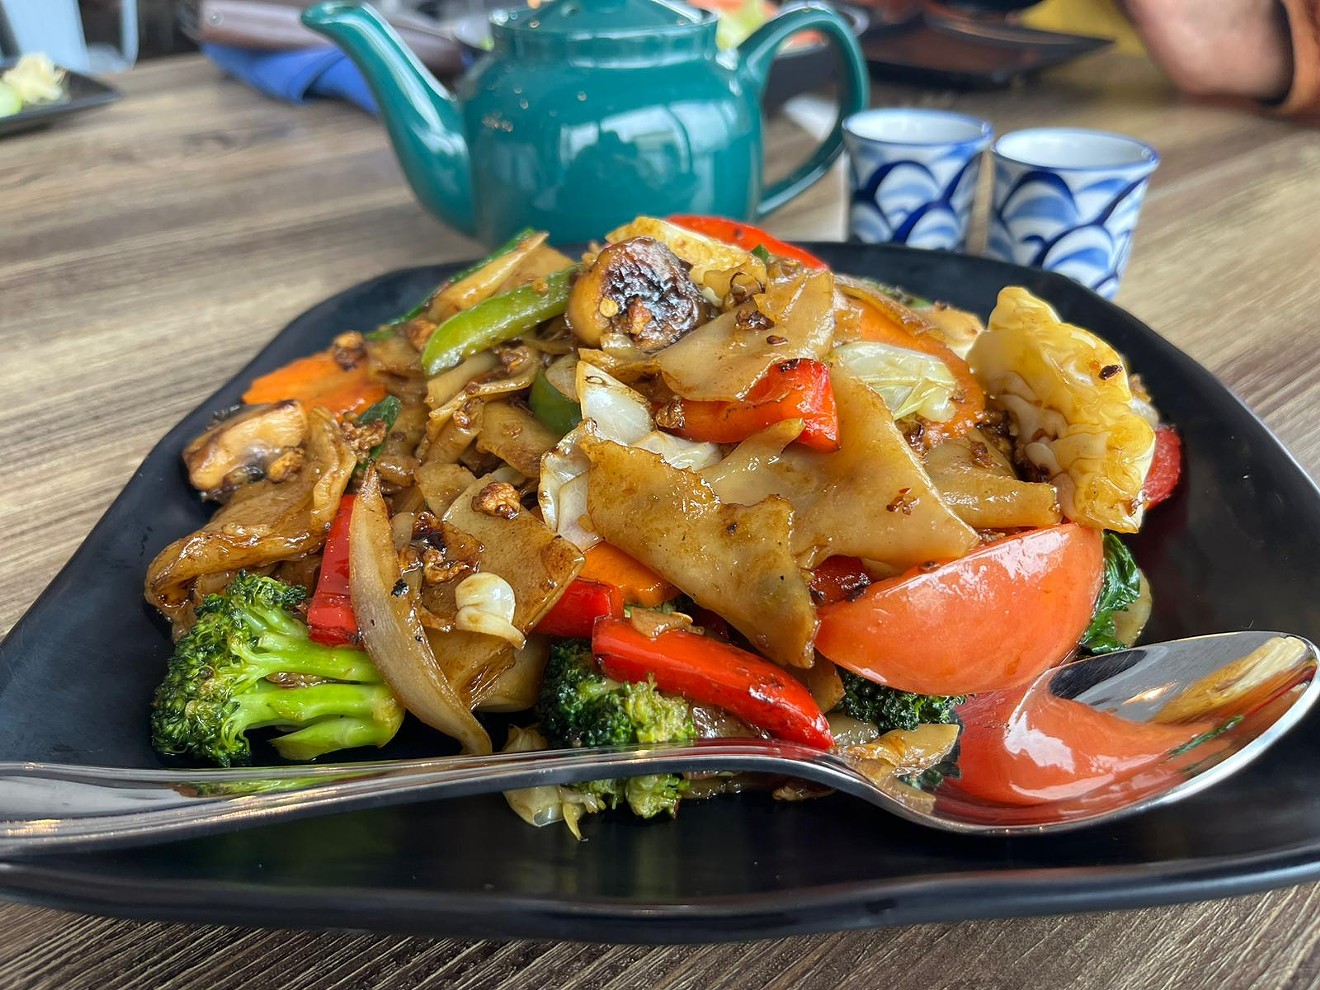 The pad kee mow dish comes drenched in a soy-based garlic sauce and your choice of protein. It's more than enough to share.